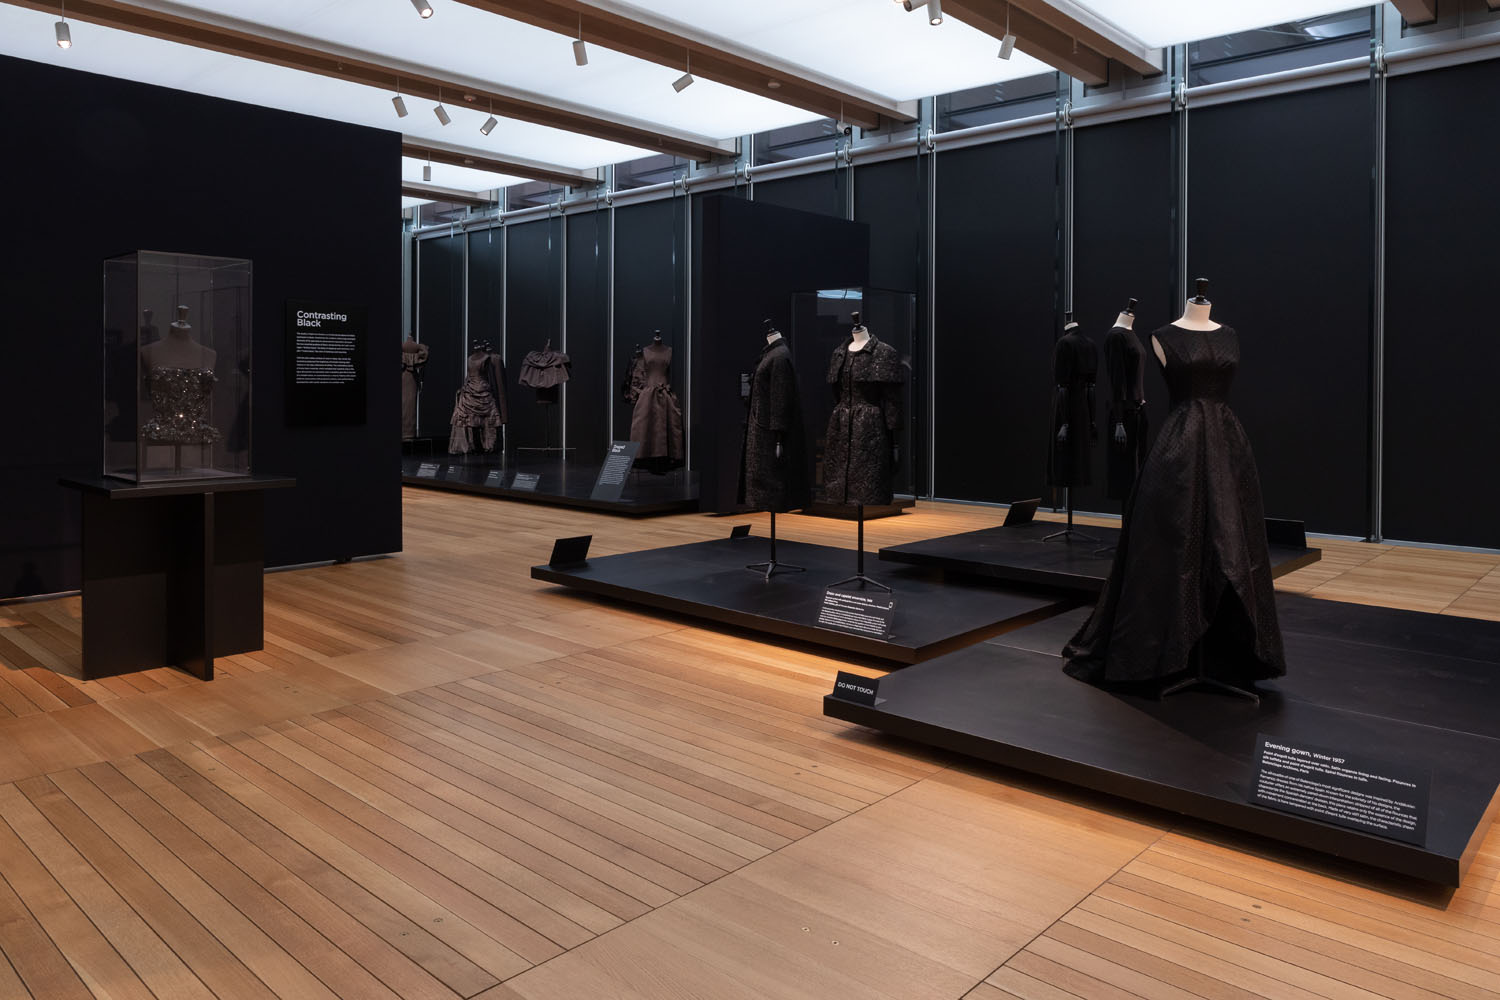 Balenciaga in Black at the Kimbell Museum was an overview of couturier Balenciaga’ s career from the 1940s to the 1960s. Over 100 pieces of hand made dresses were featured, including gowns, suits and accessories, all black. The goal of the exhibition design was to accentuate the various shapes, volumes, textures, and silhouettes of Balenciaga’ s timeless creations, and to encourage visitors to examine the exquisite detail in his work. Freestanding cases allowed for 36 0 degree, close-up viewing of the pieces, while cascading platforms enabled the composition of dramatic tableauxs. 